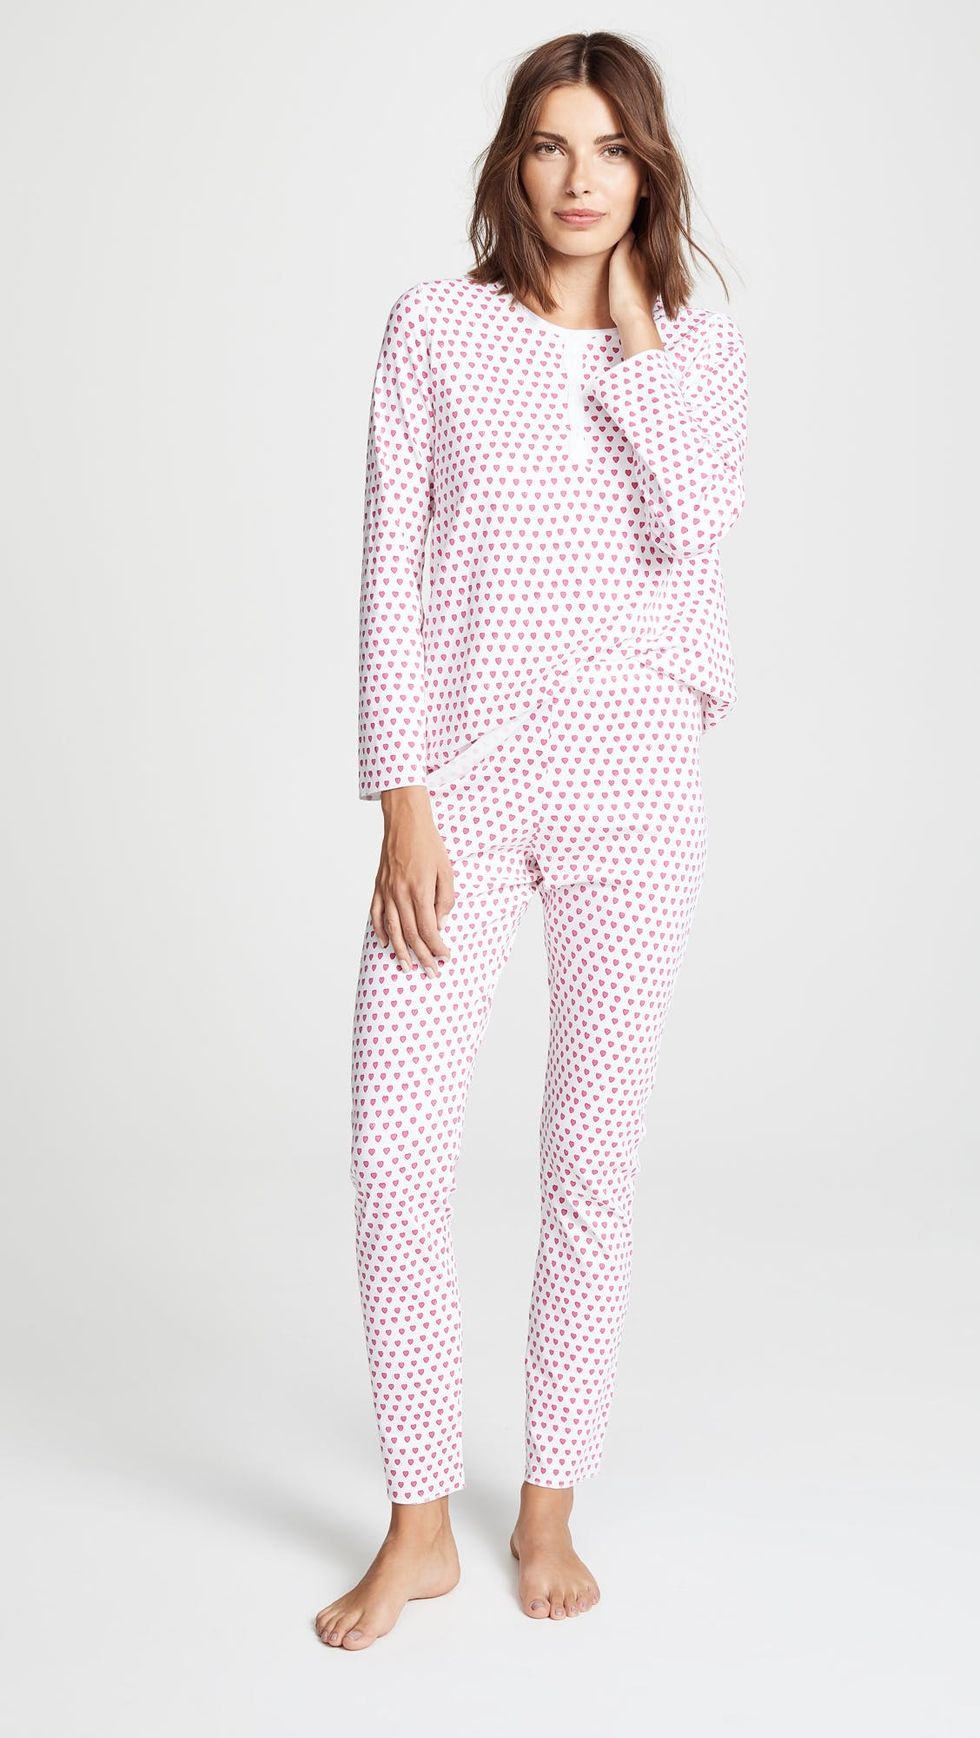 15 (Not Cheesy) Matching PJ Sets to Snuggle Up in This Season - Brit + Co